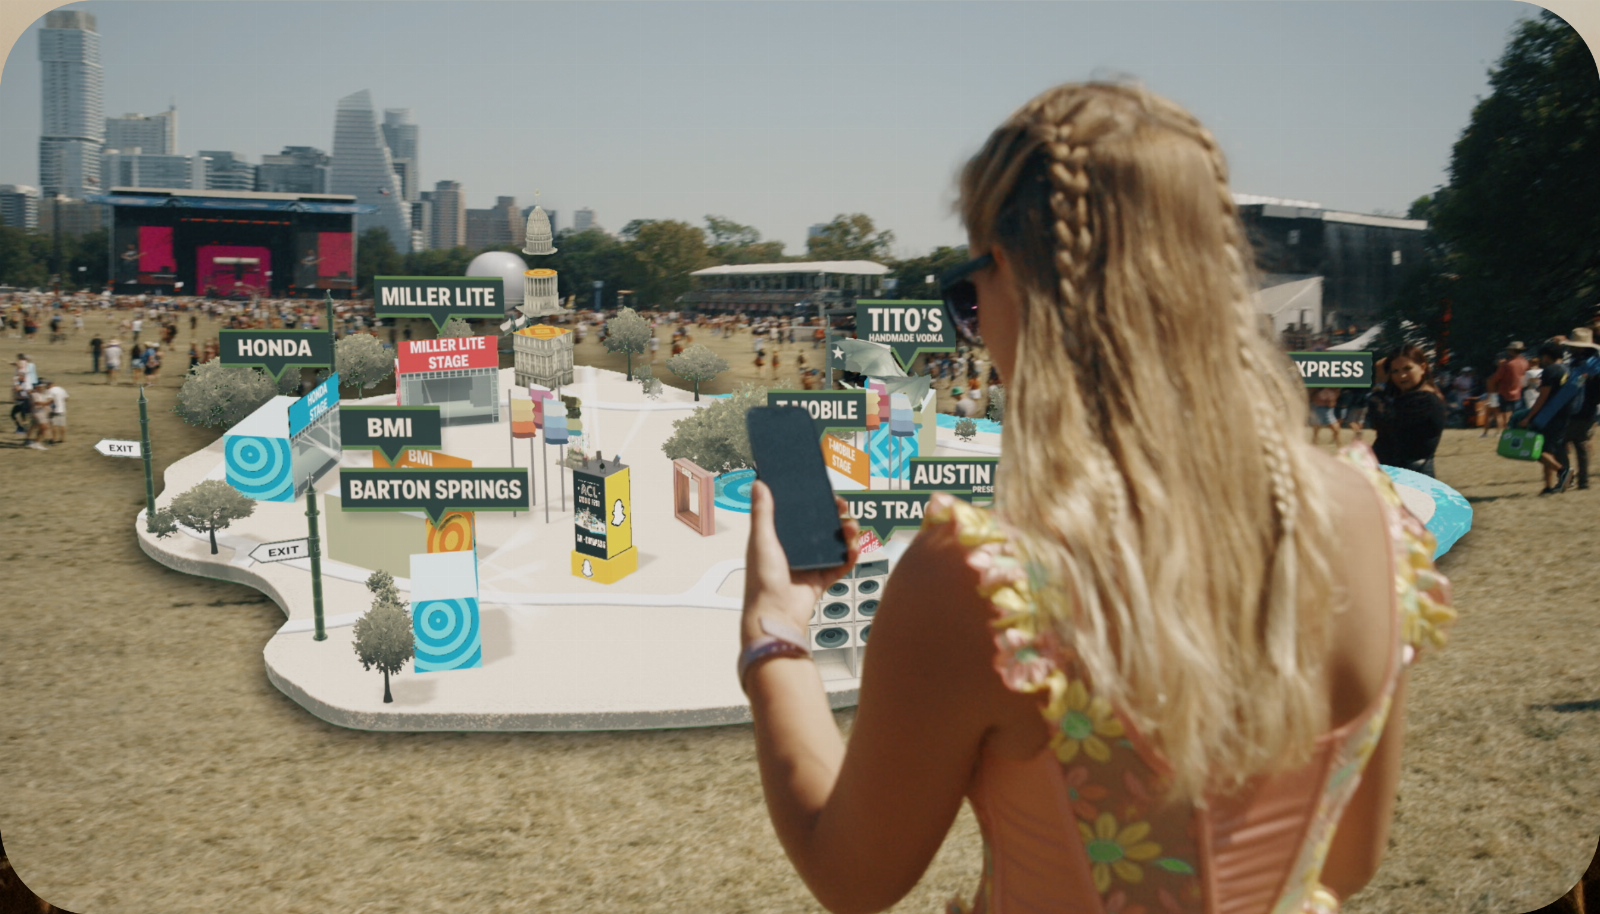 Snap is expanding its AR features to 16 additional music festivals